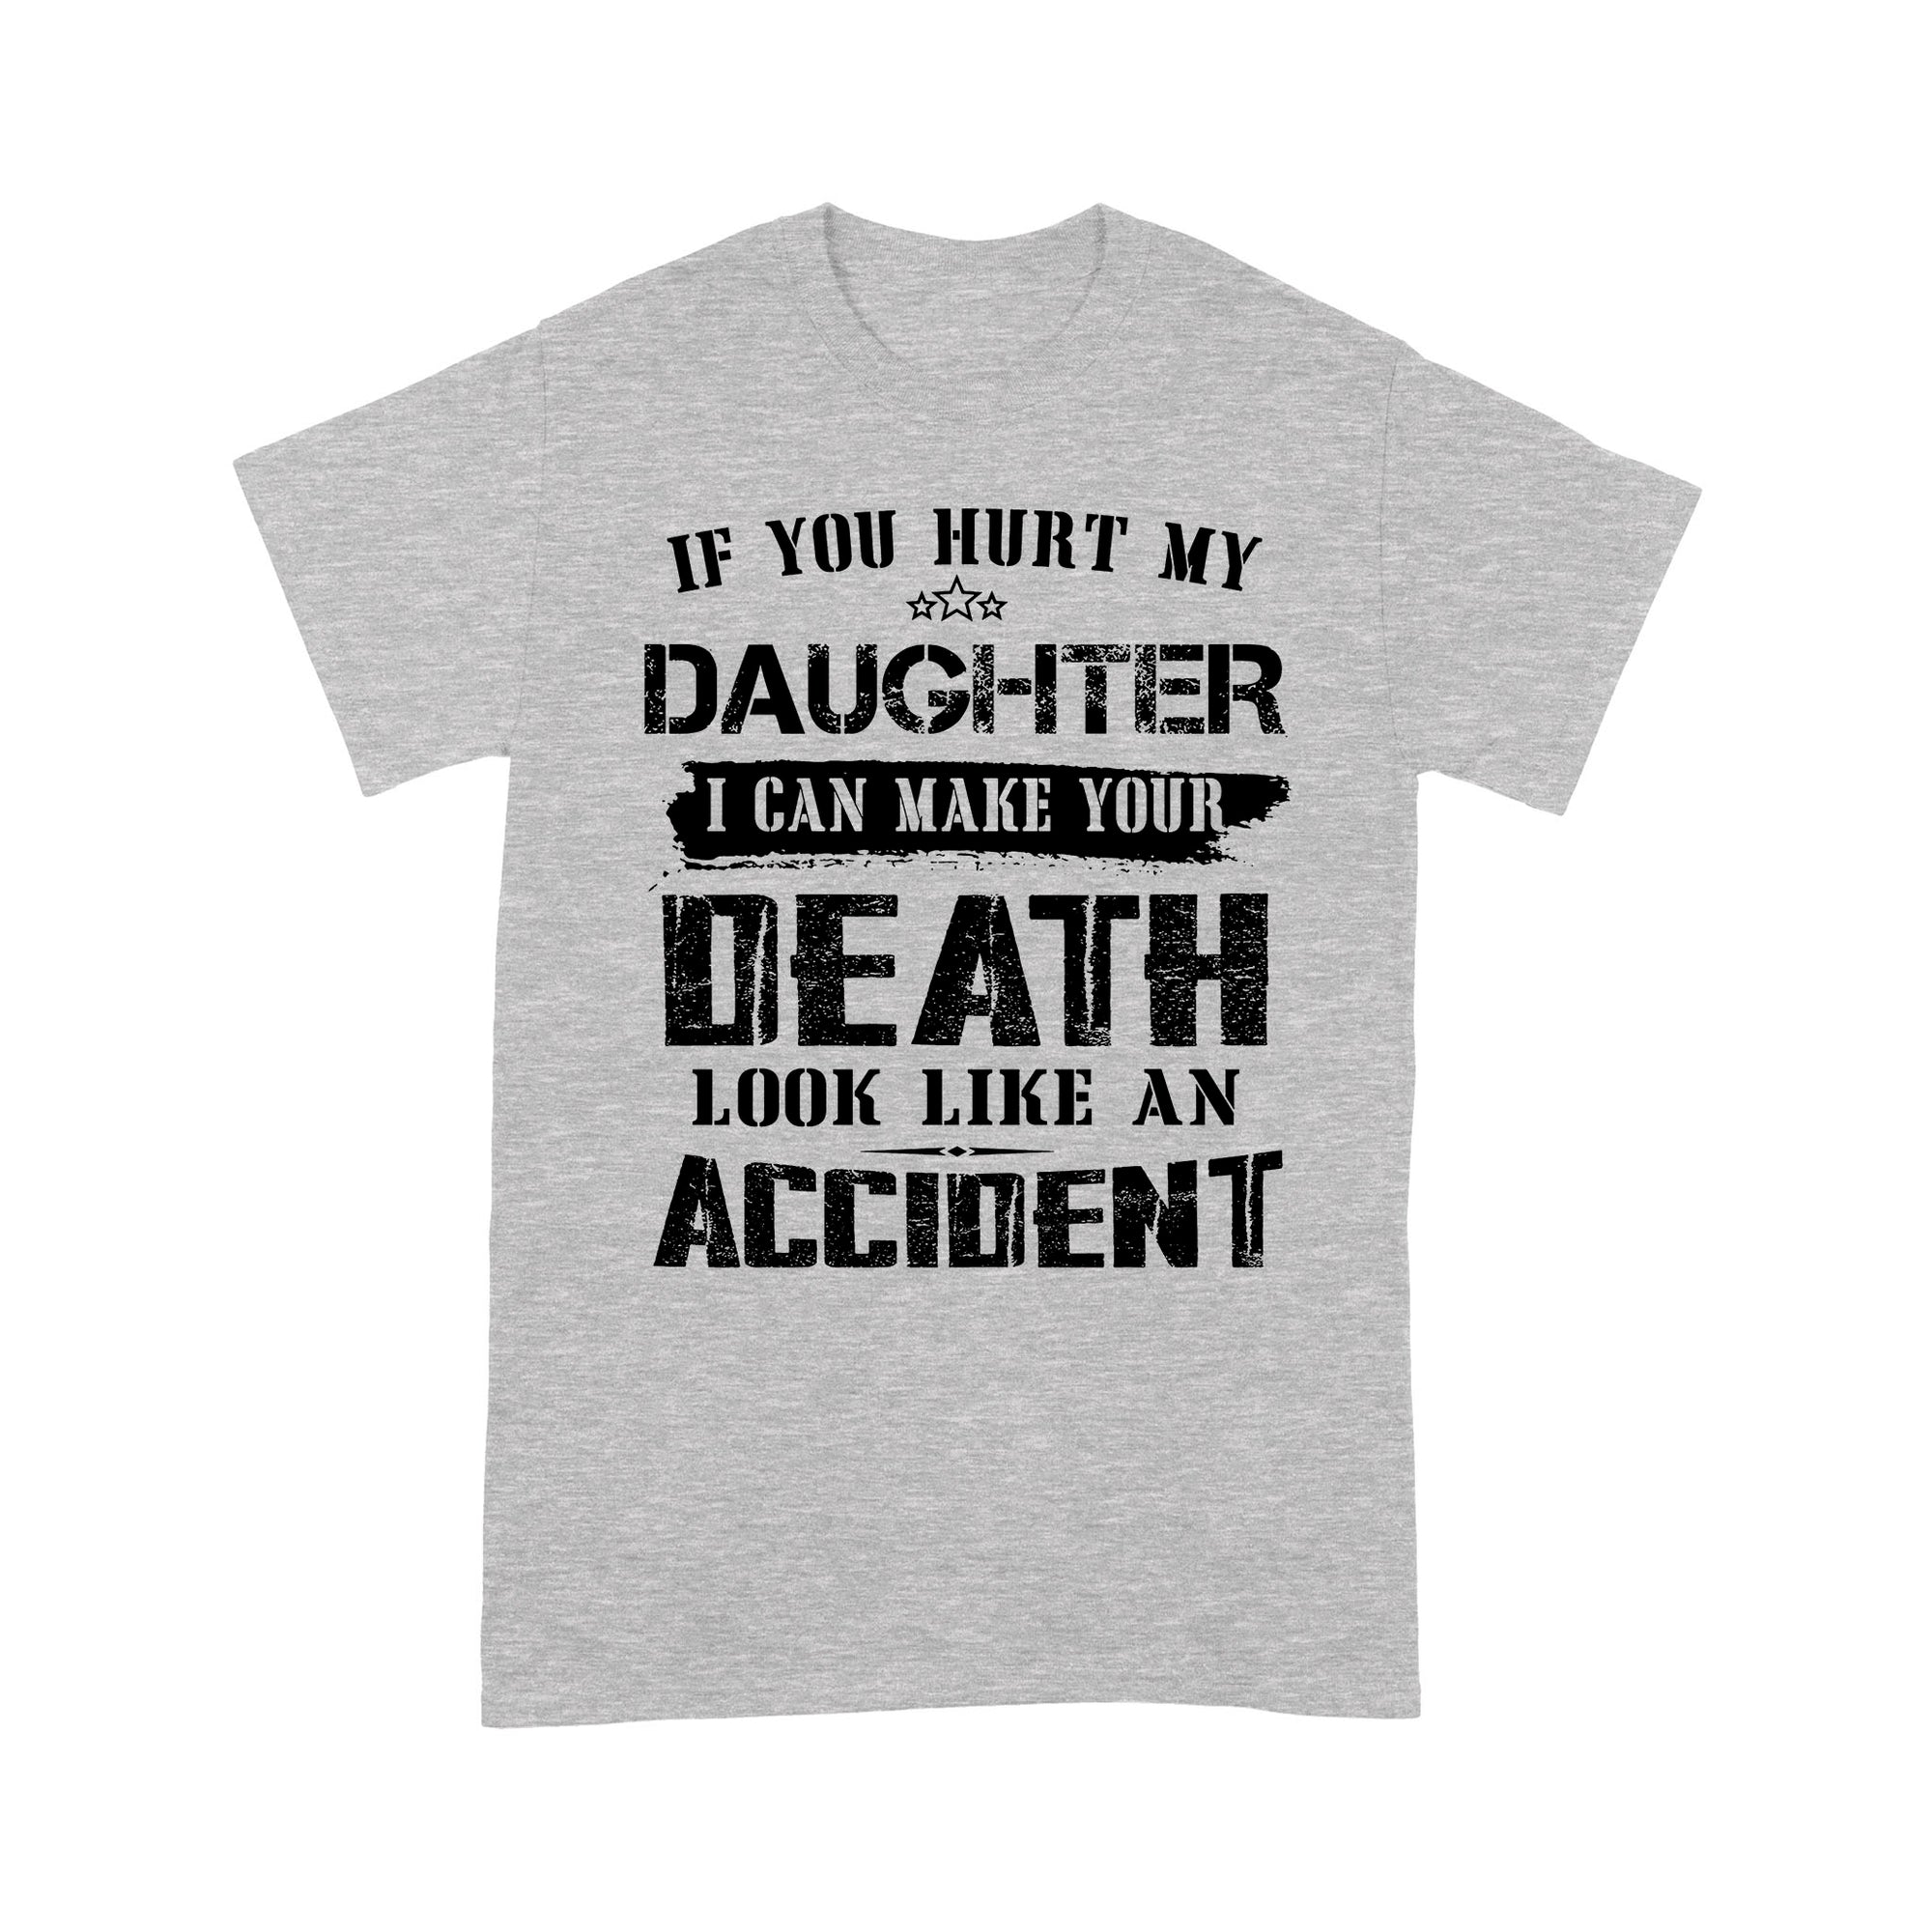 Gift Ideas for Dad If You Hurt My Daughter I Can Make Your Death Look Like An Accident (w) - Standard T-shirt